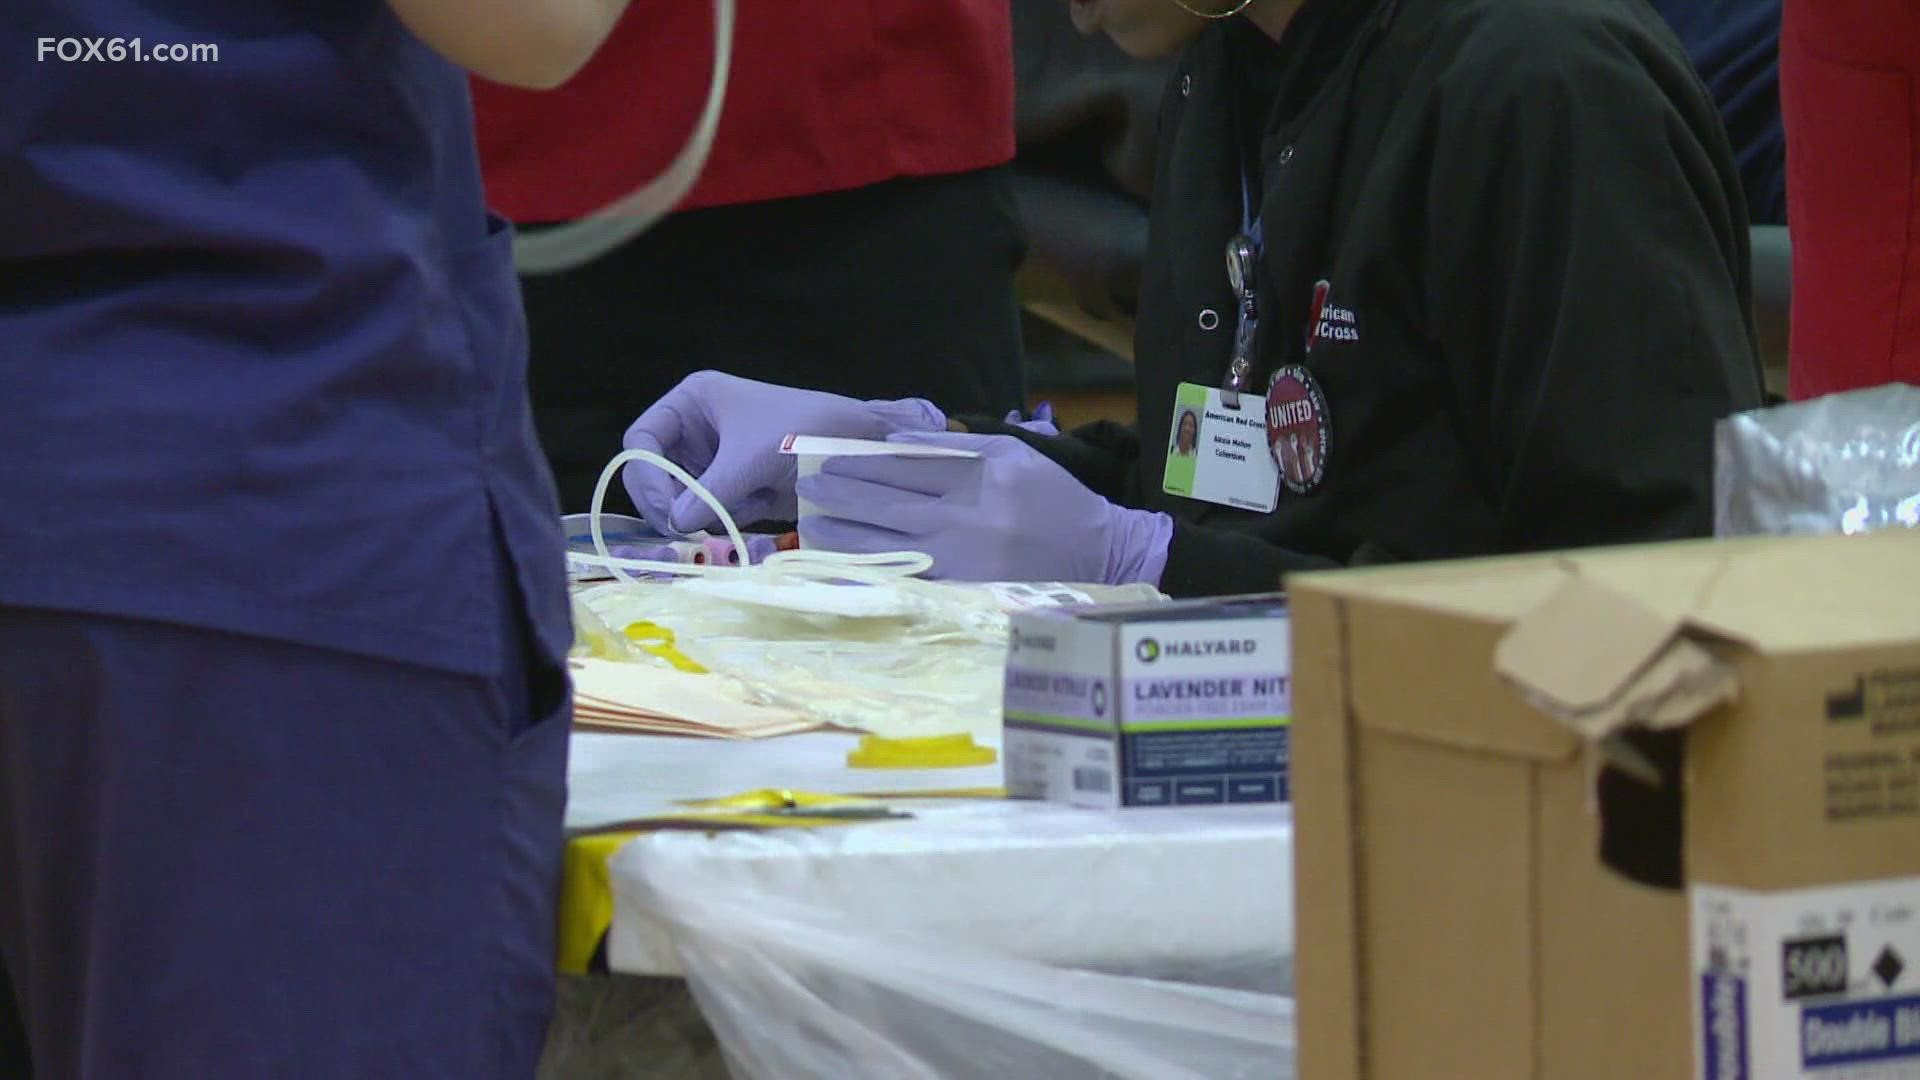 The Manchester Road Race Committee will team up with American Red Cross once again when it sponsors its annual blood drive on the day after Thanksgiving.